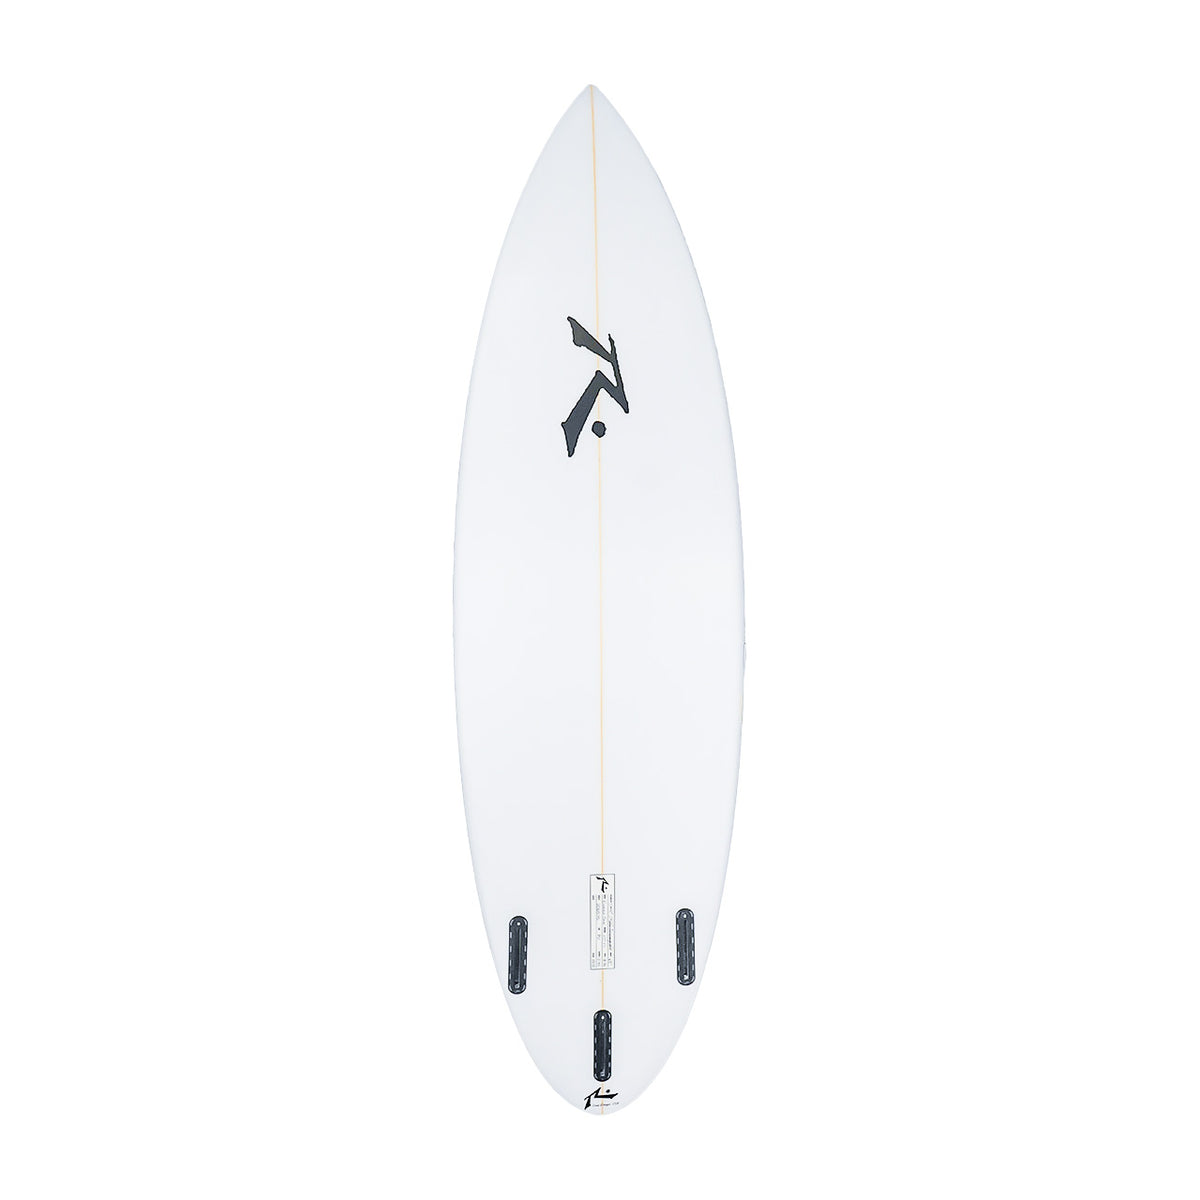 Enough Said High Performance Shortboard - In Stock - Bottom View - Rusty Surfboards